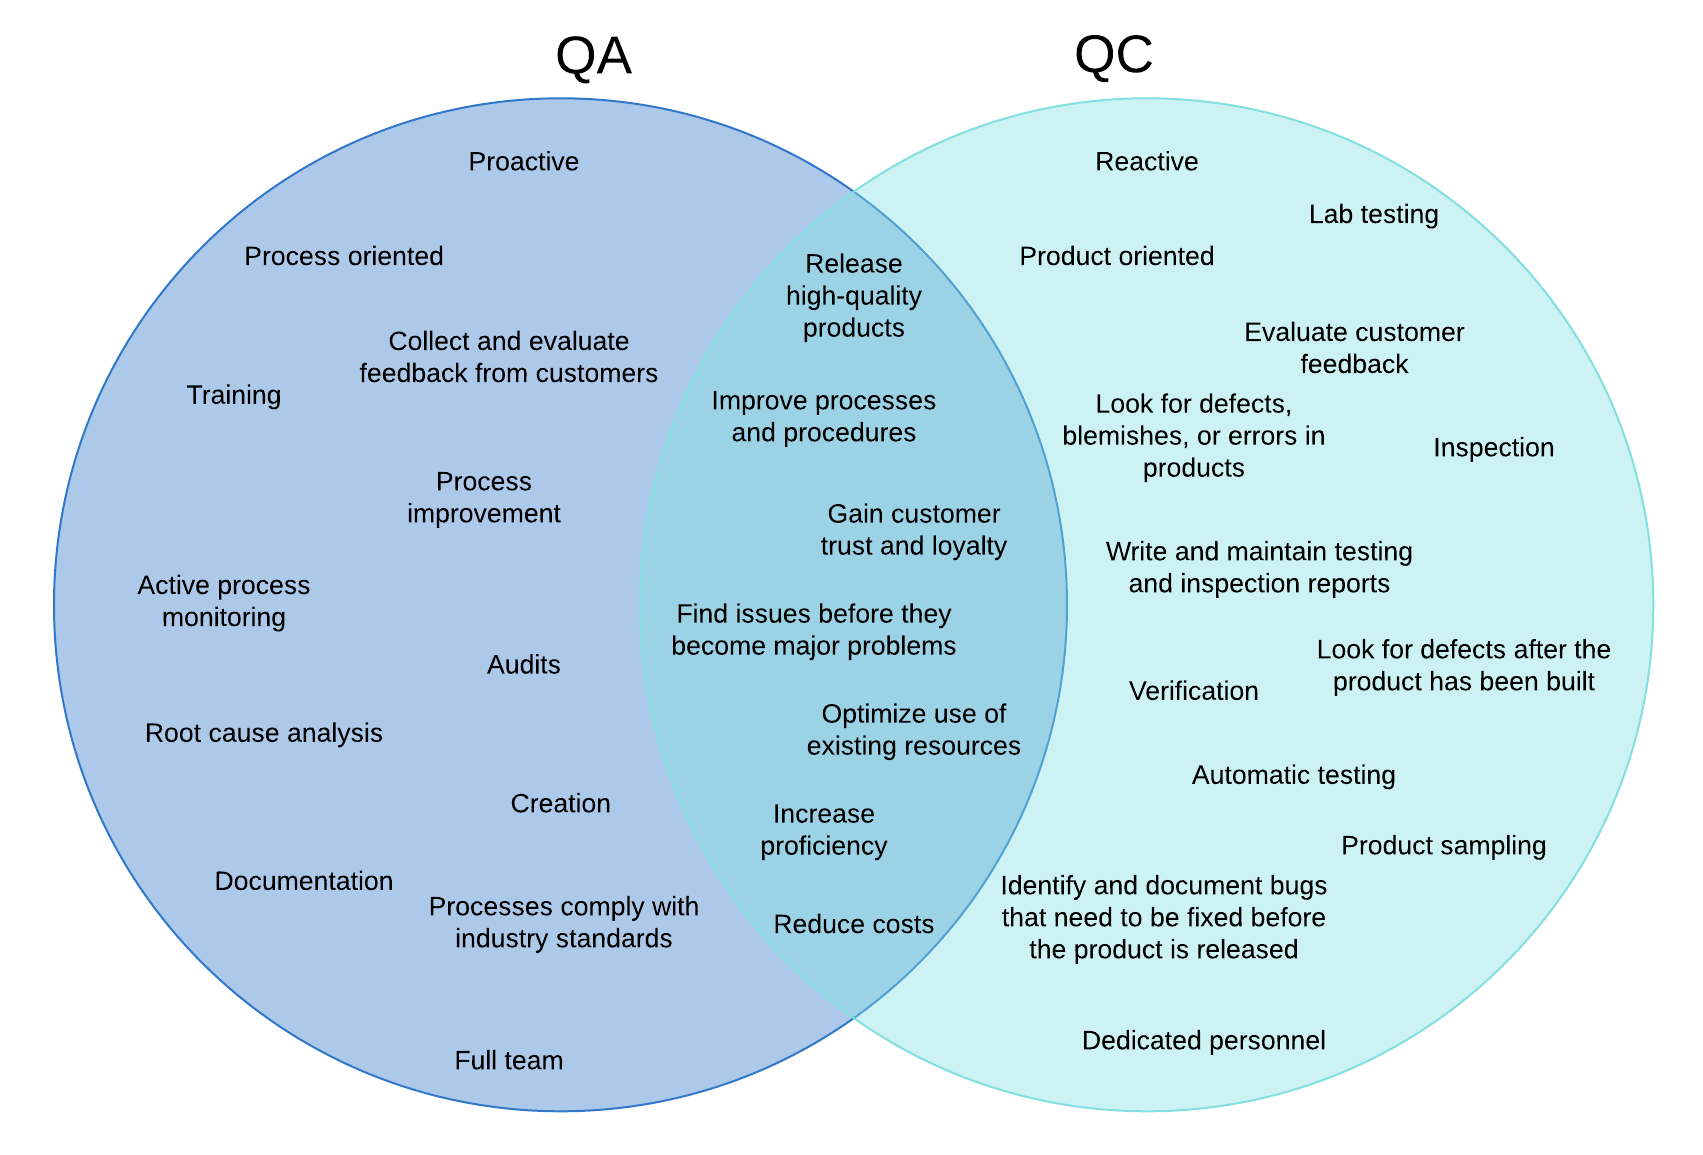 A Venn diagram comparing Quality Assurance and Quality Control in software engineering. Quality Assurance is proactive, process-oriented, and focused on preventing defects. Quality Control is reactive, product-oriented, and focused on finding and fixing defects.